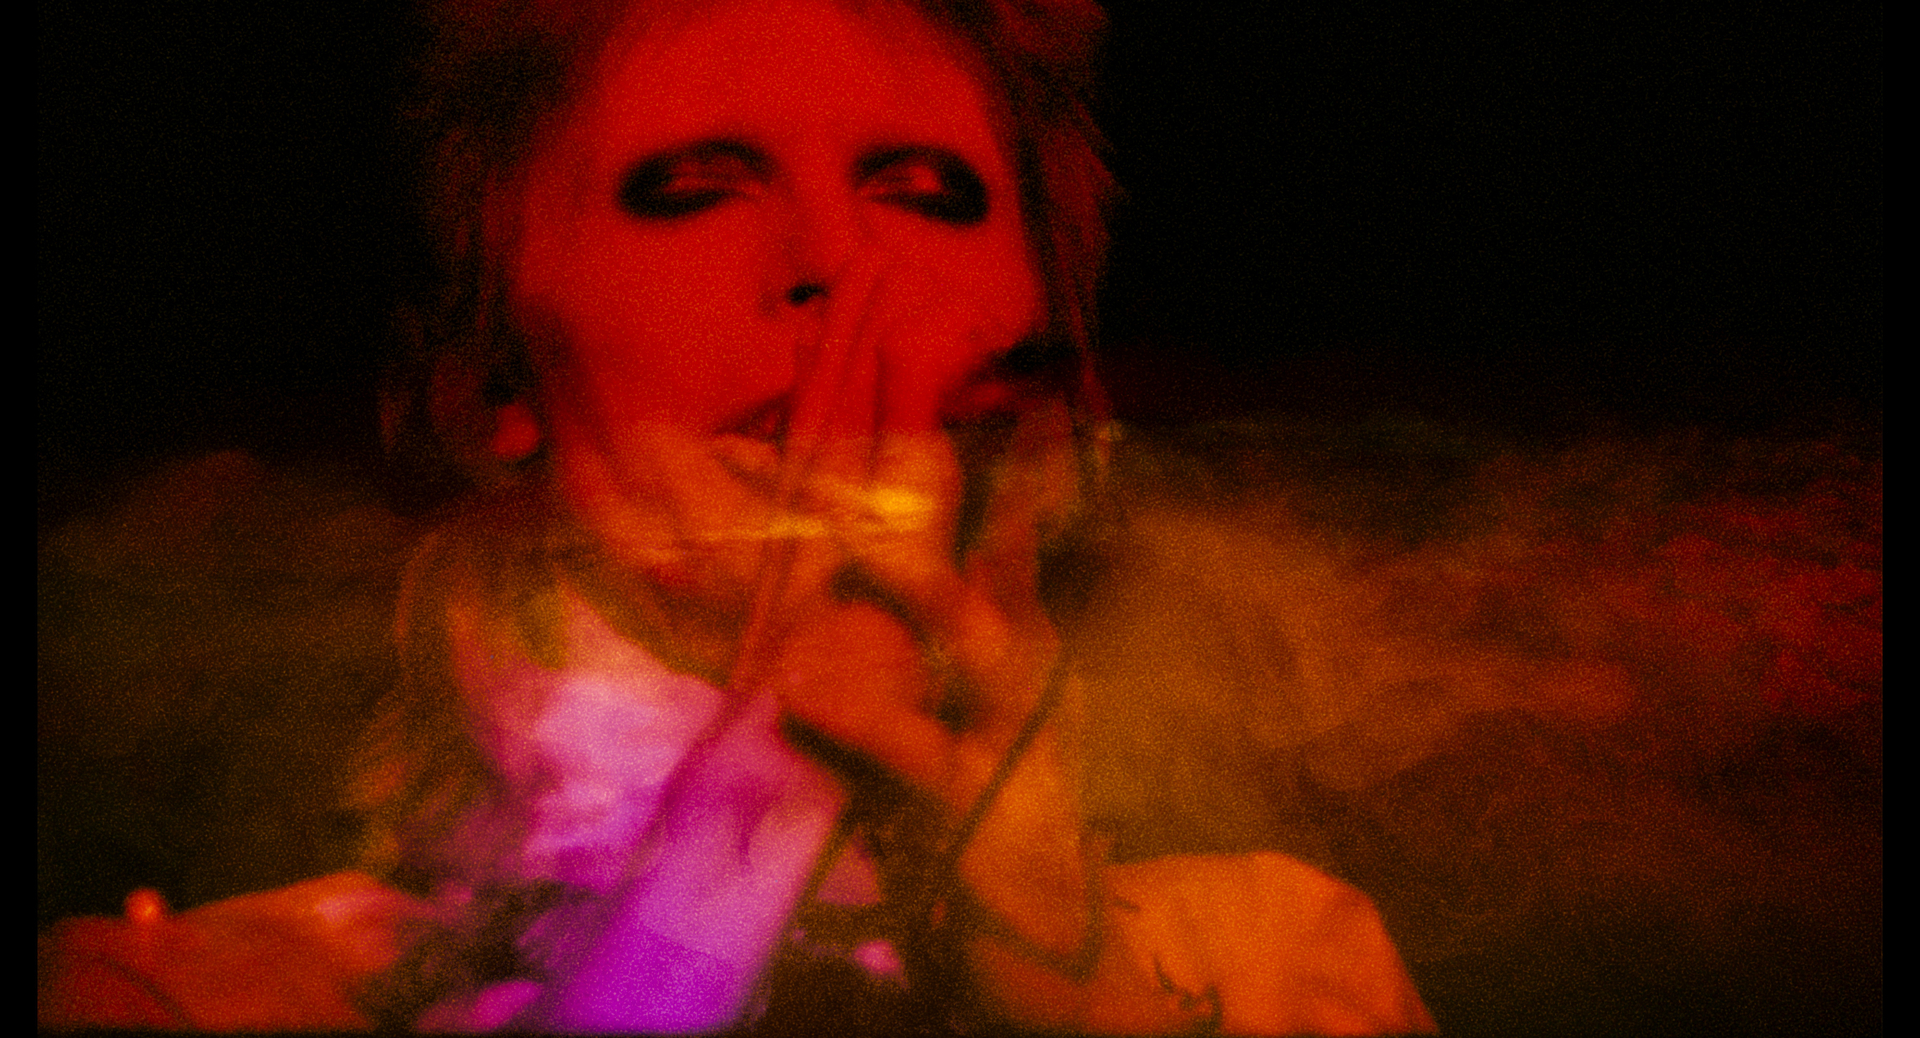 A smokey image of a young David Bowie crooning into the mic from 'Moonage Daydream'